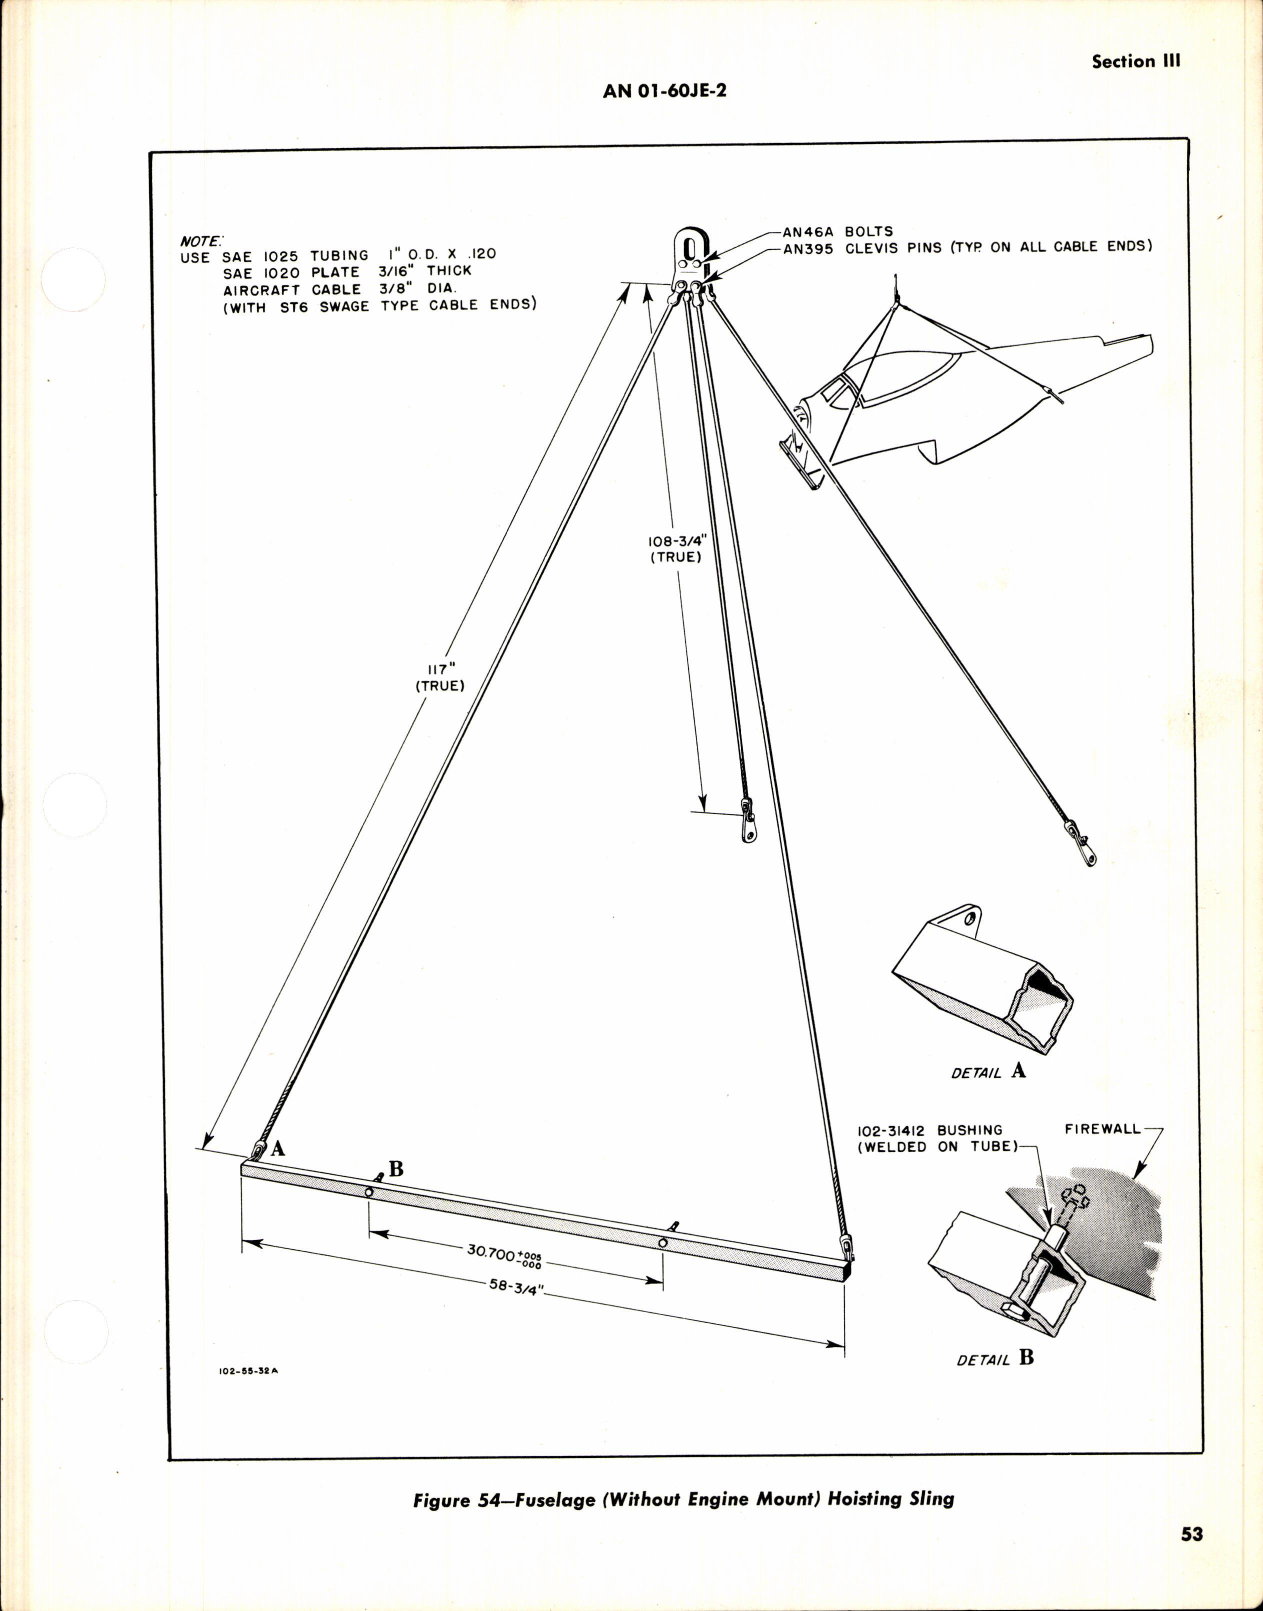 Sample page 31 from AirCorps Library document: Maintenance Instructions for F-51D, F-51M, ZF-51K, and TF-51D